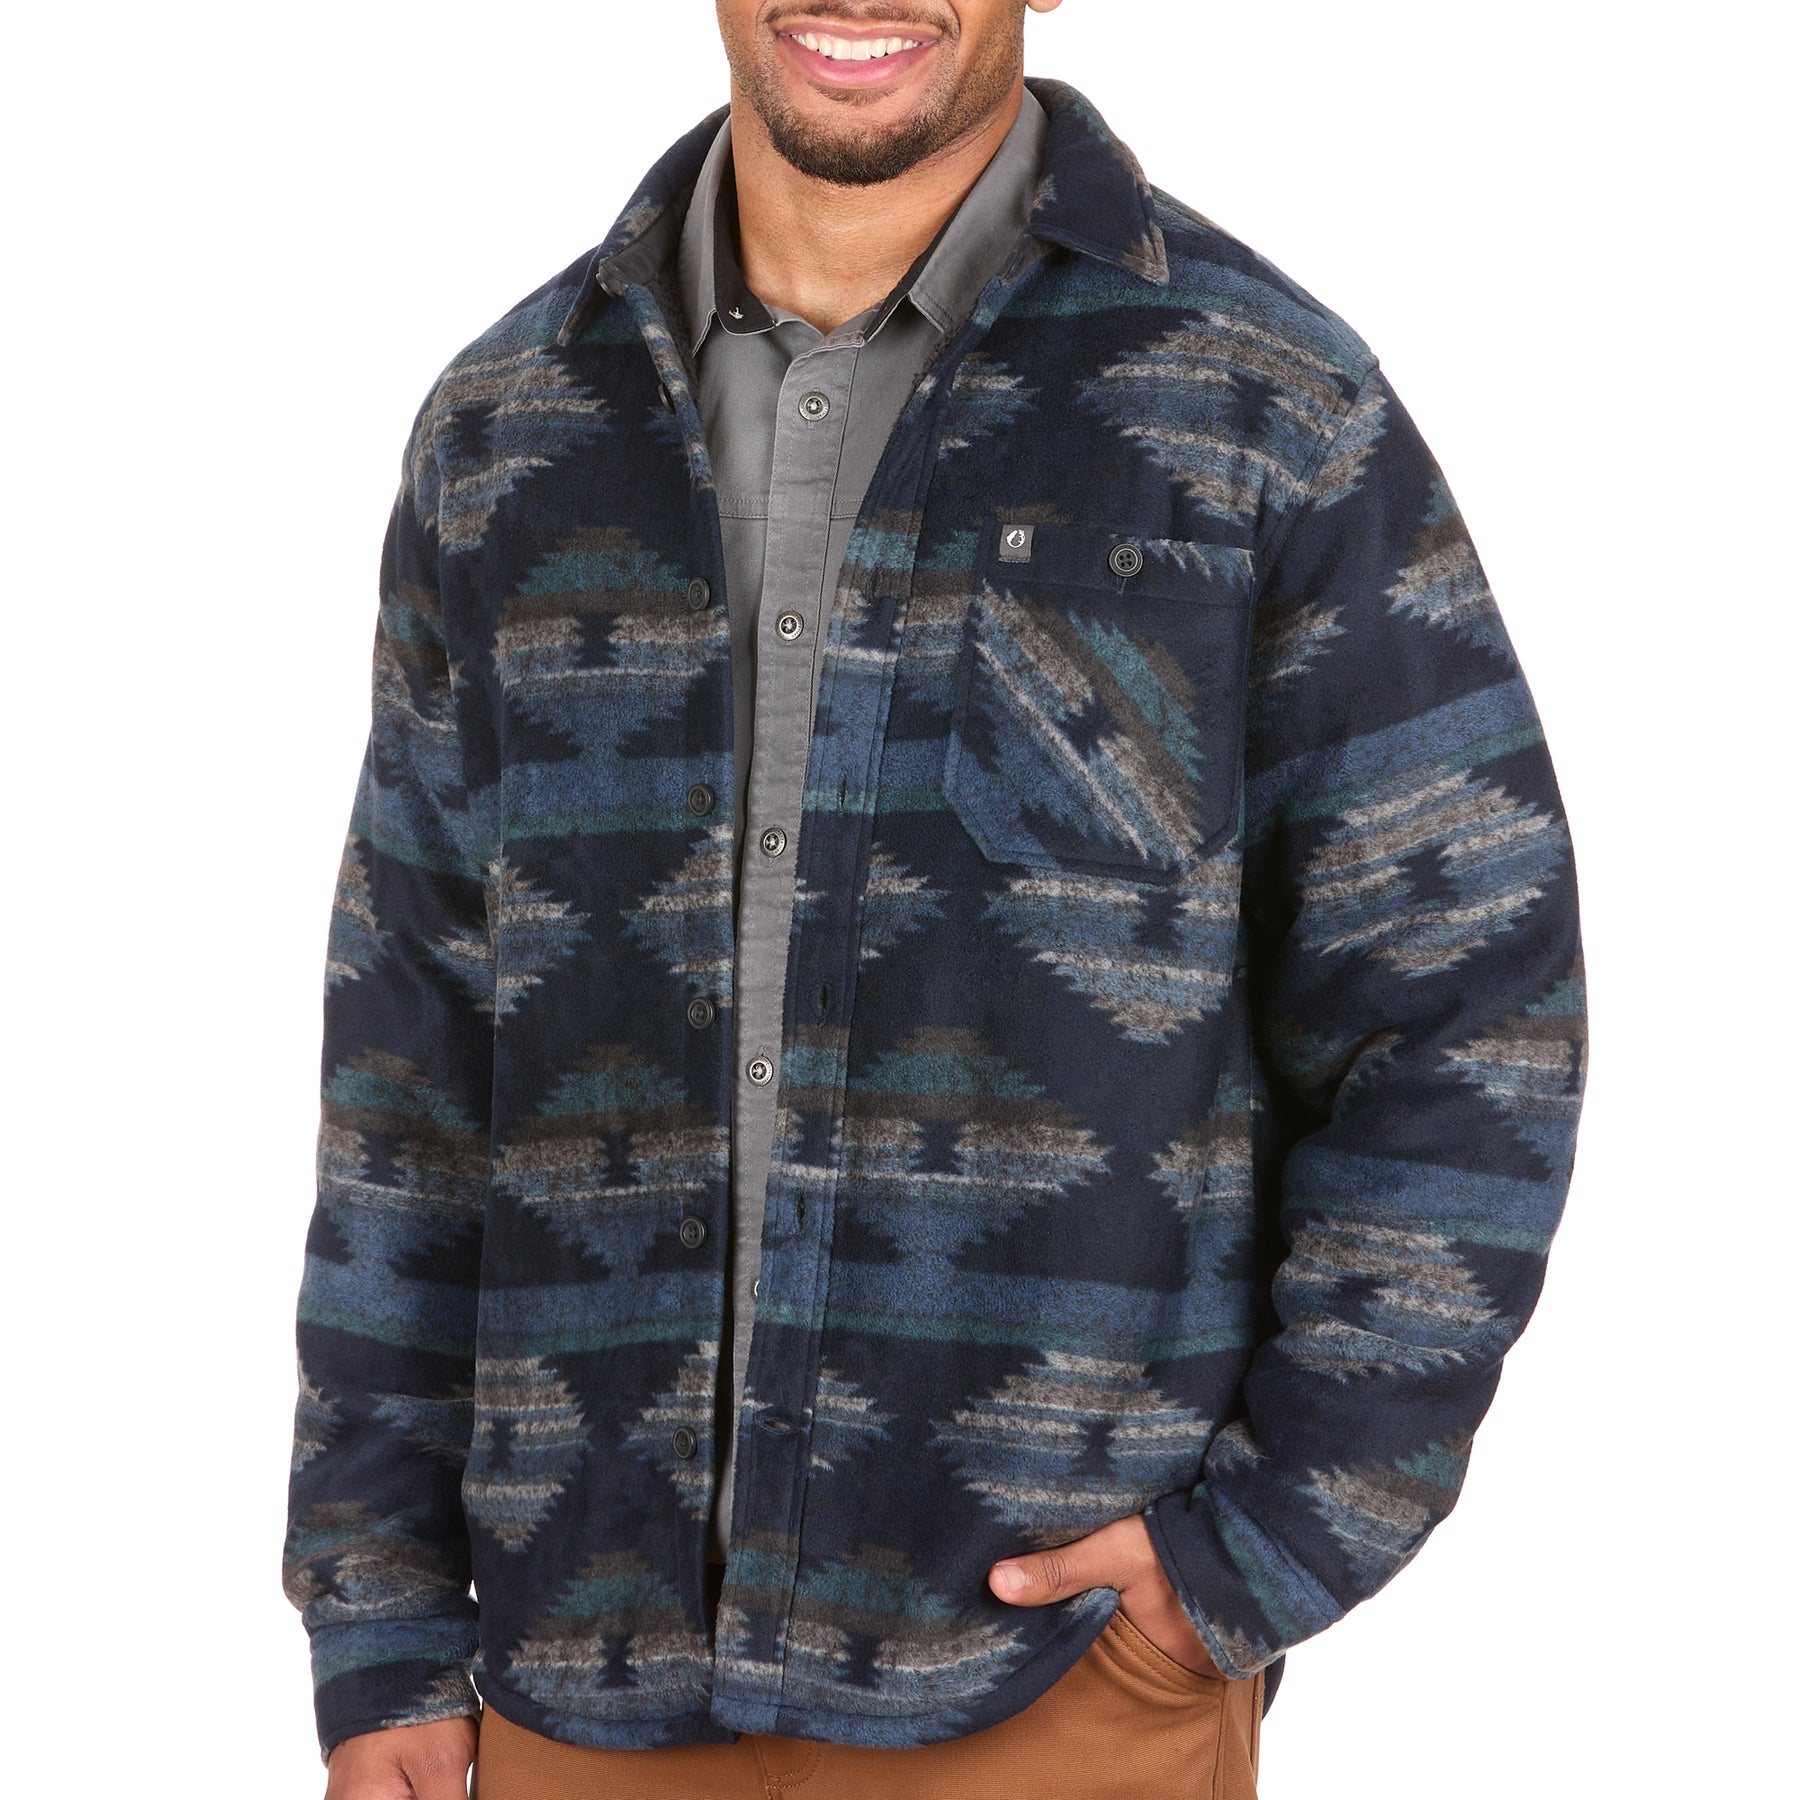 The American Outdoorsman Men's Bonded Polar Fleece Lined Plaid Flannel Shirt Jacket, Perfect for The Outdoors (Navy/Blue, Large)